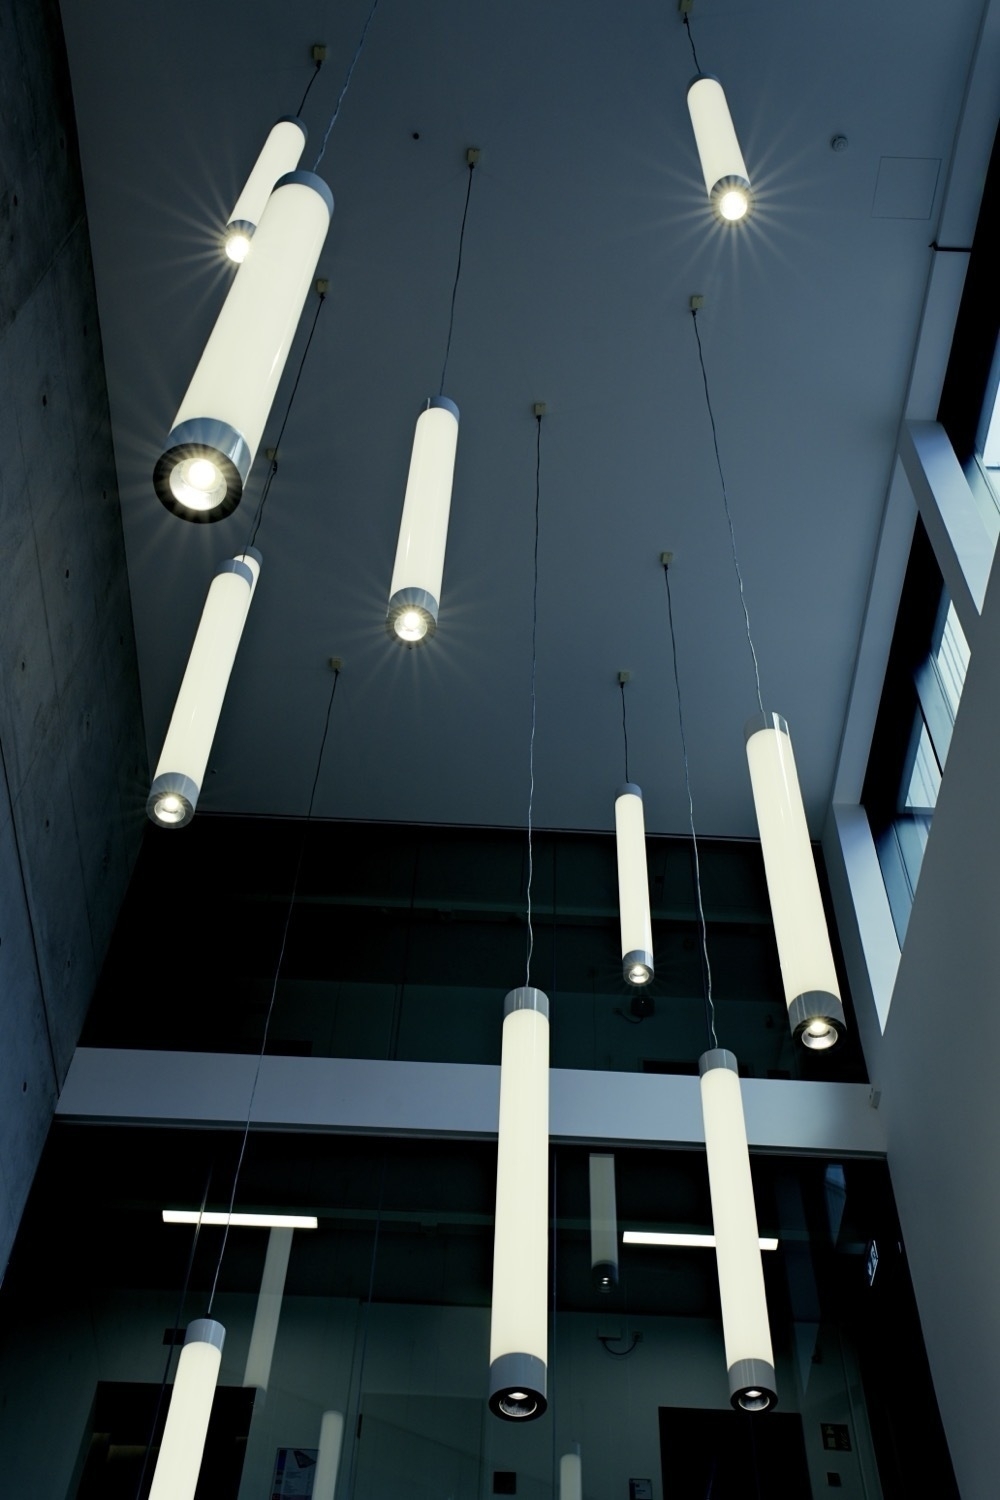 Several rod lamps hang from the ceiling at different heights in a multi-storey room. The lamps also have a spotlight facing down, from which the light radiates in the shape of a star.